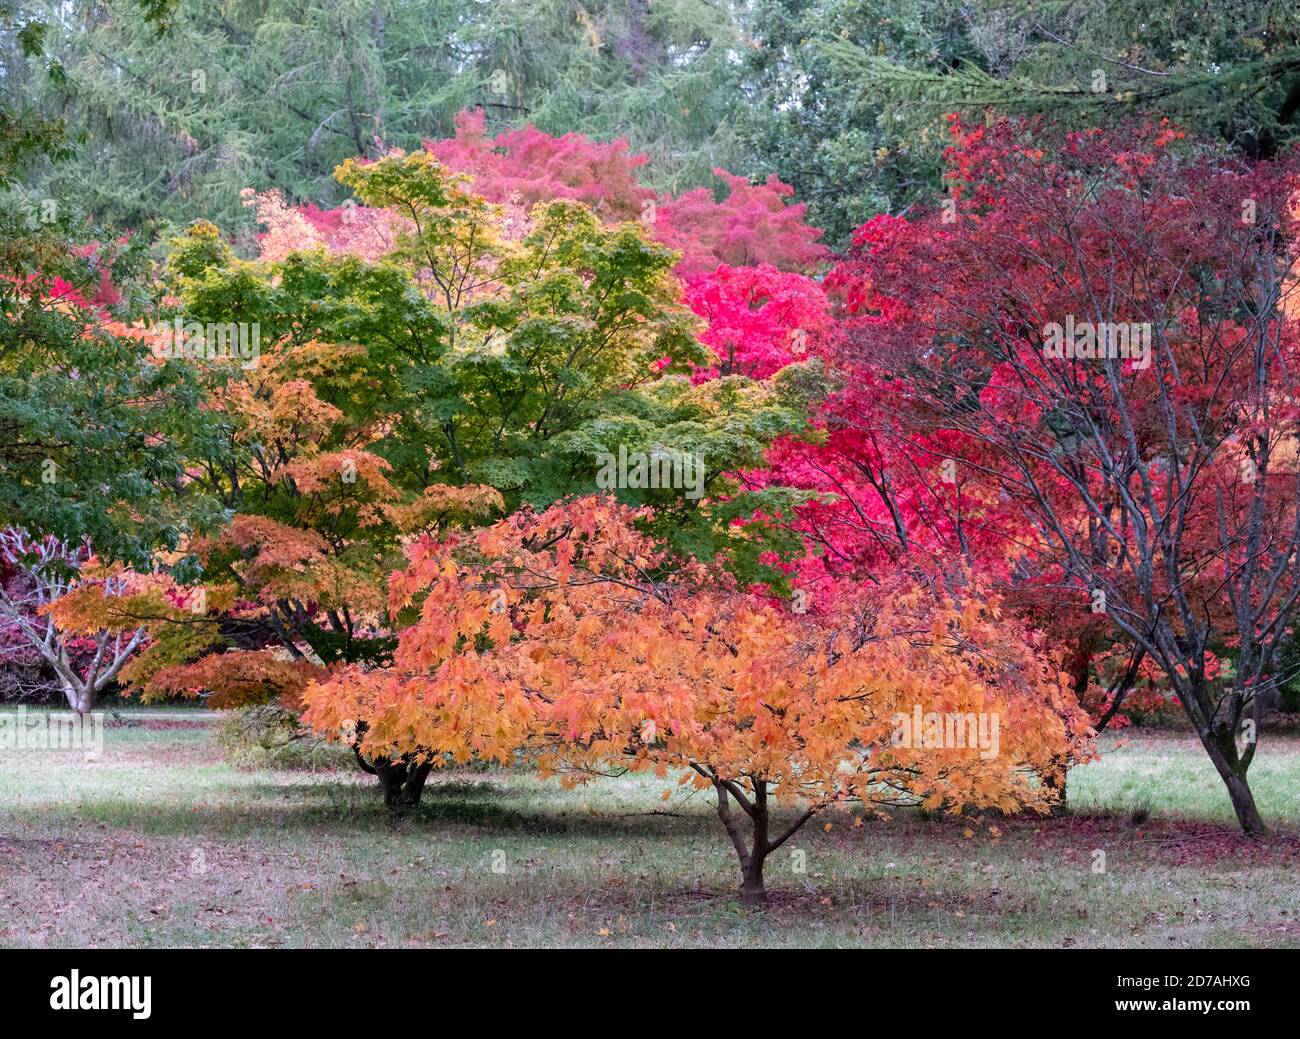 Autumn colours. Acer and maple trees in a blaze of colour, photographed at Westonbirt Arboretum, Gloucestershire, UK in the month of October. Stock Photo